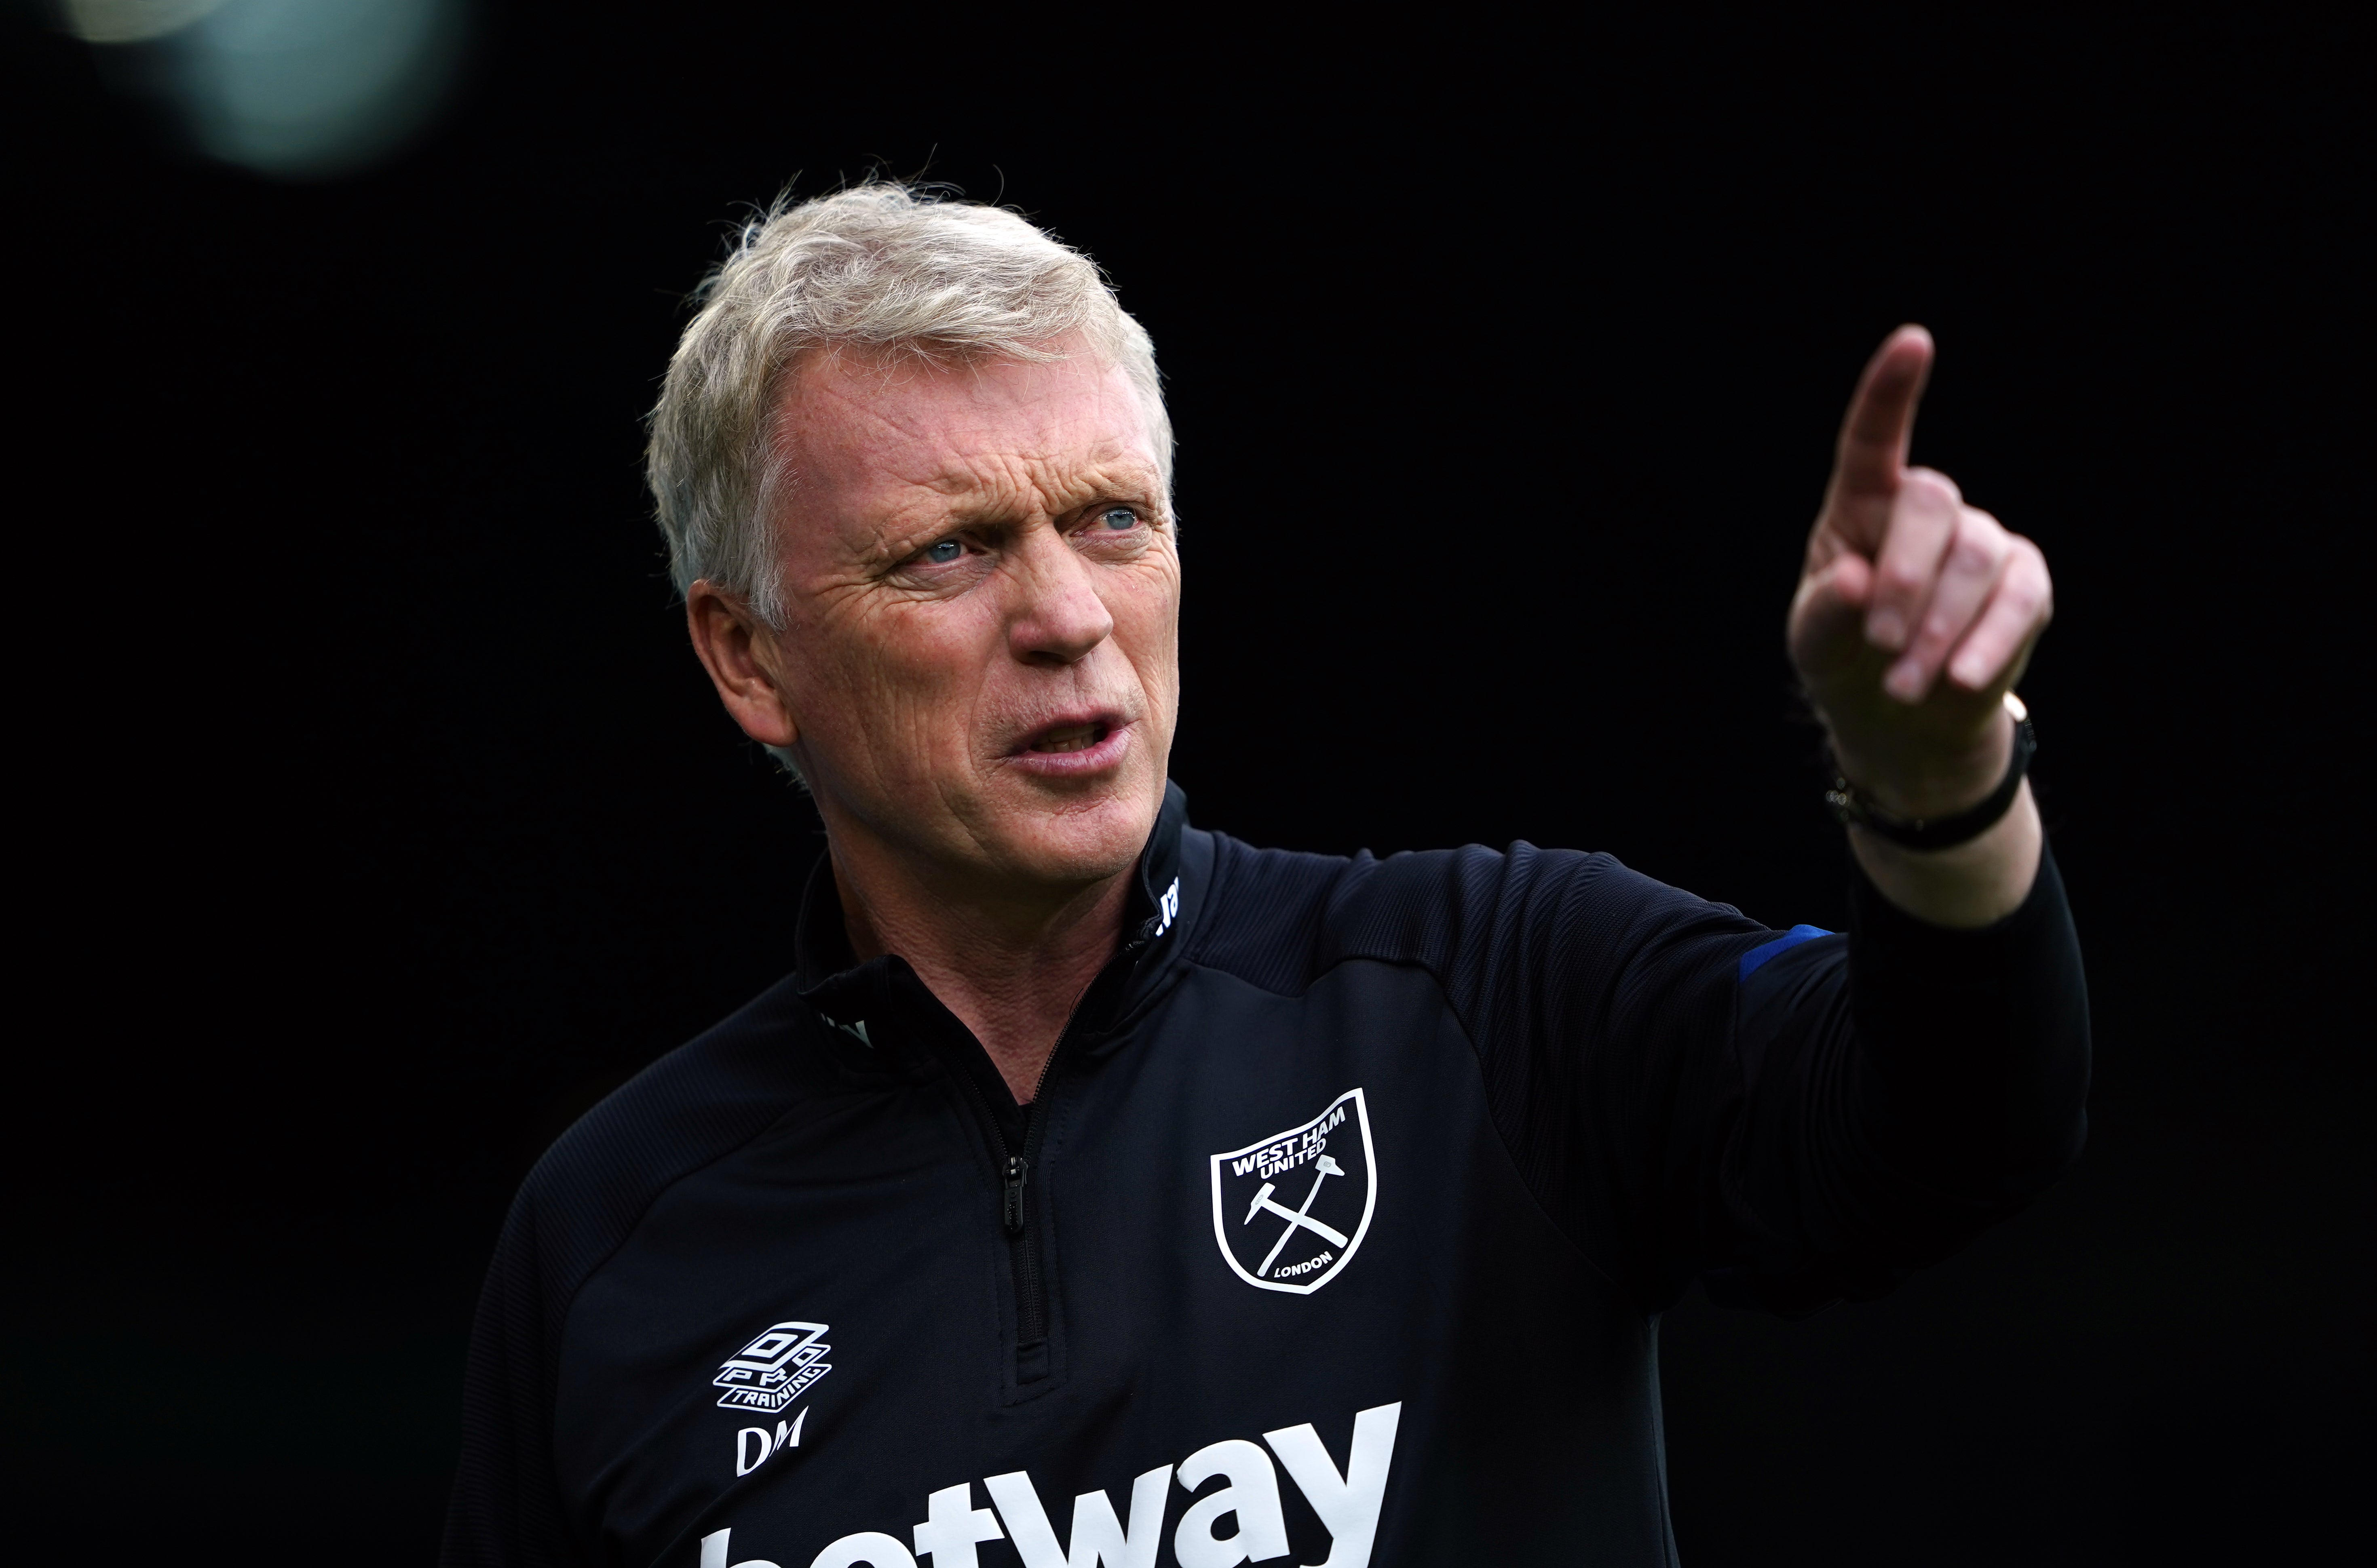 David Moyes wants West Ham to be welcomed in the Europa League and for their fans to behave themselves (Zac Goodwin/PA)